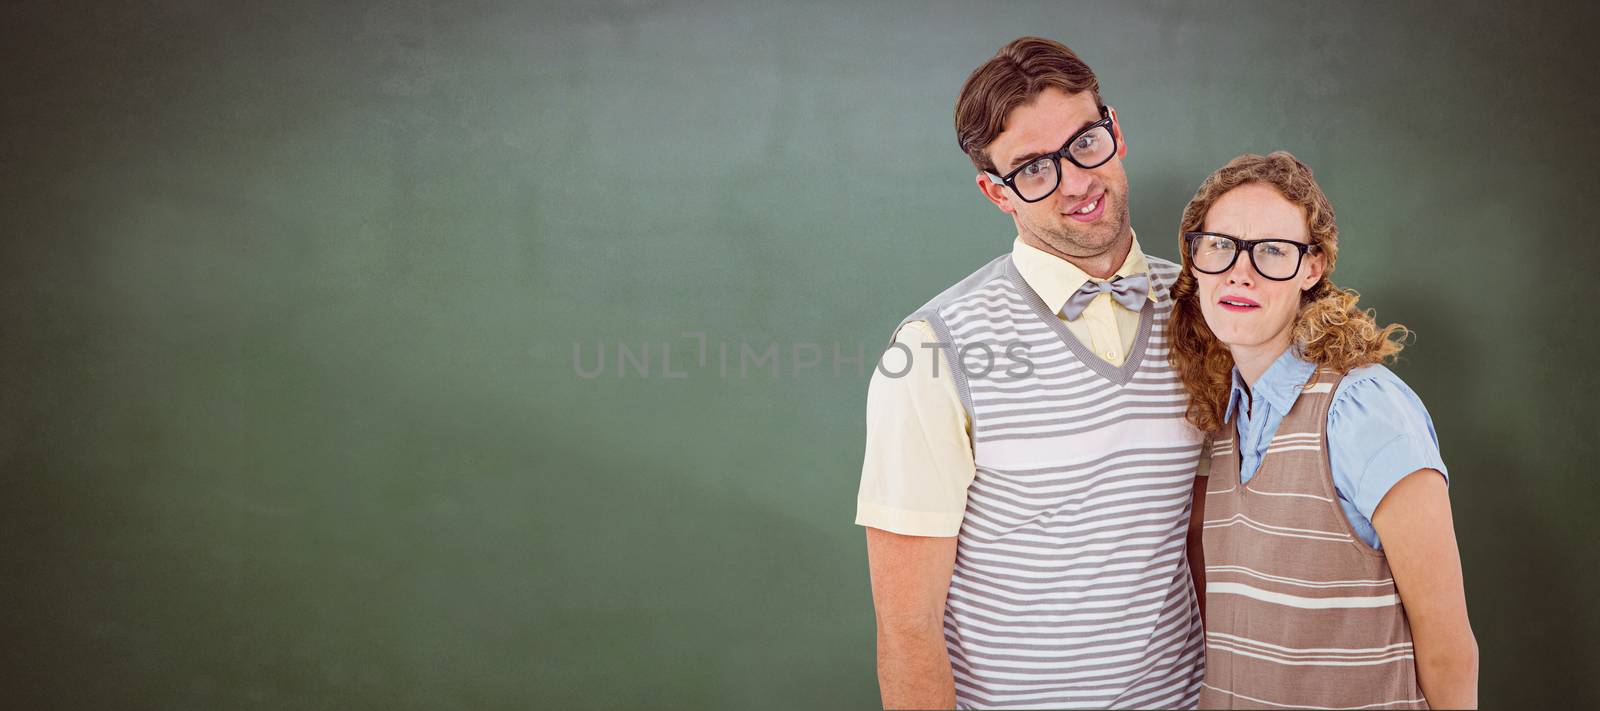 Happy geeky hipster couple with silly faces against green chalkboard